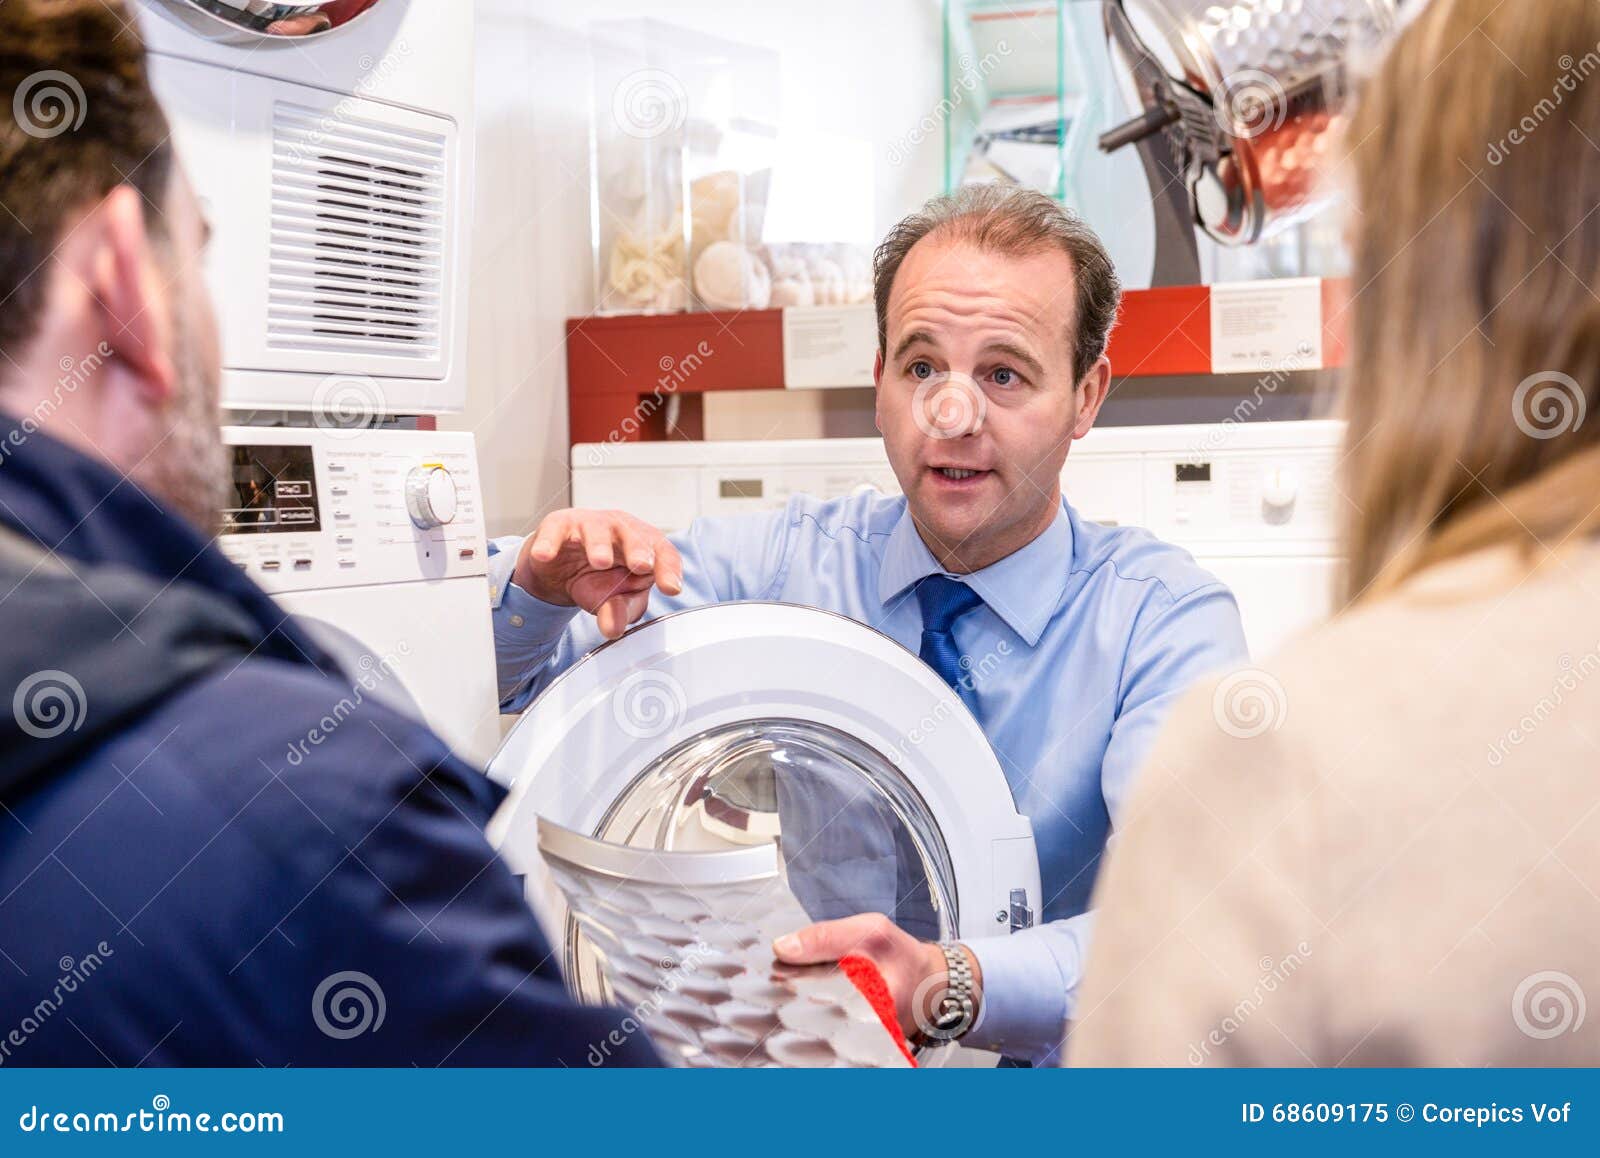 salesman explaining product to couple in hypermarket